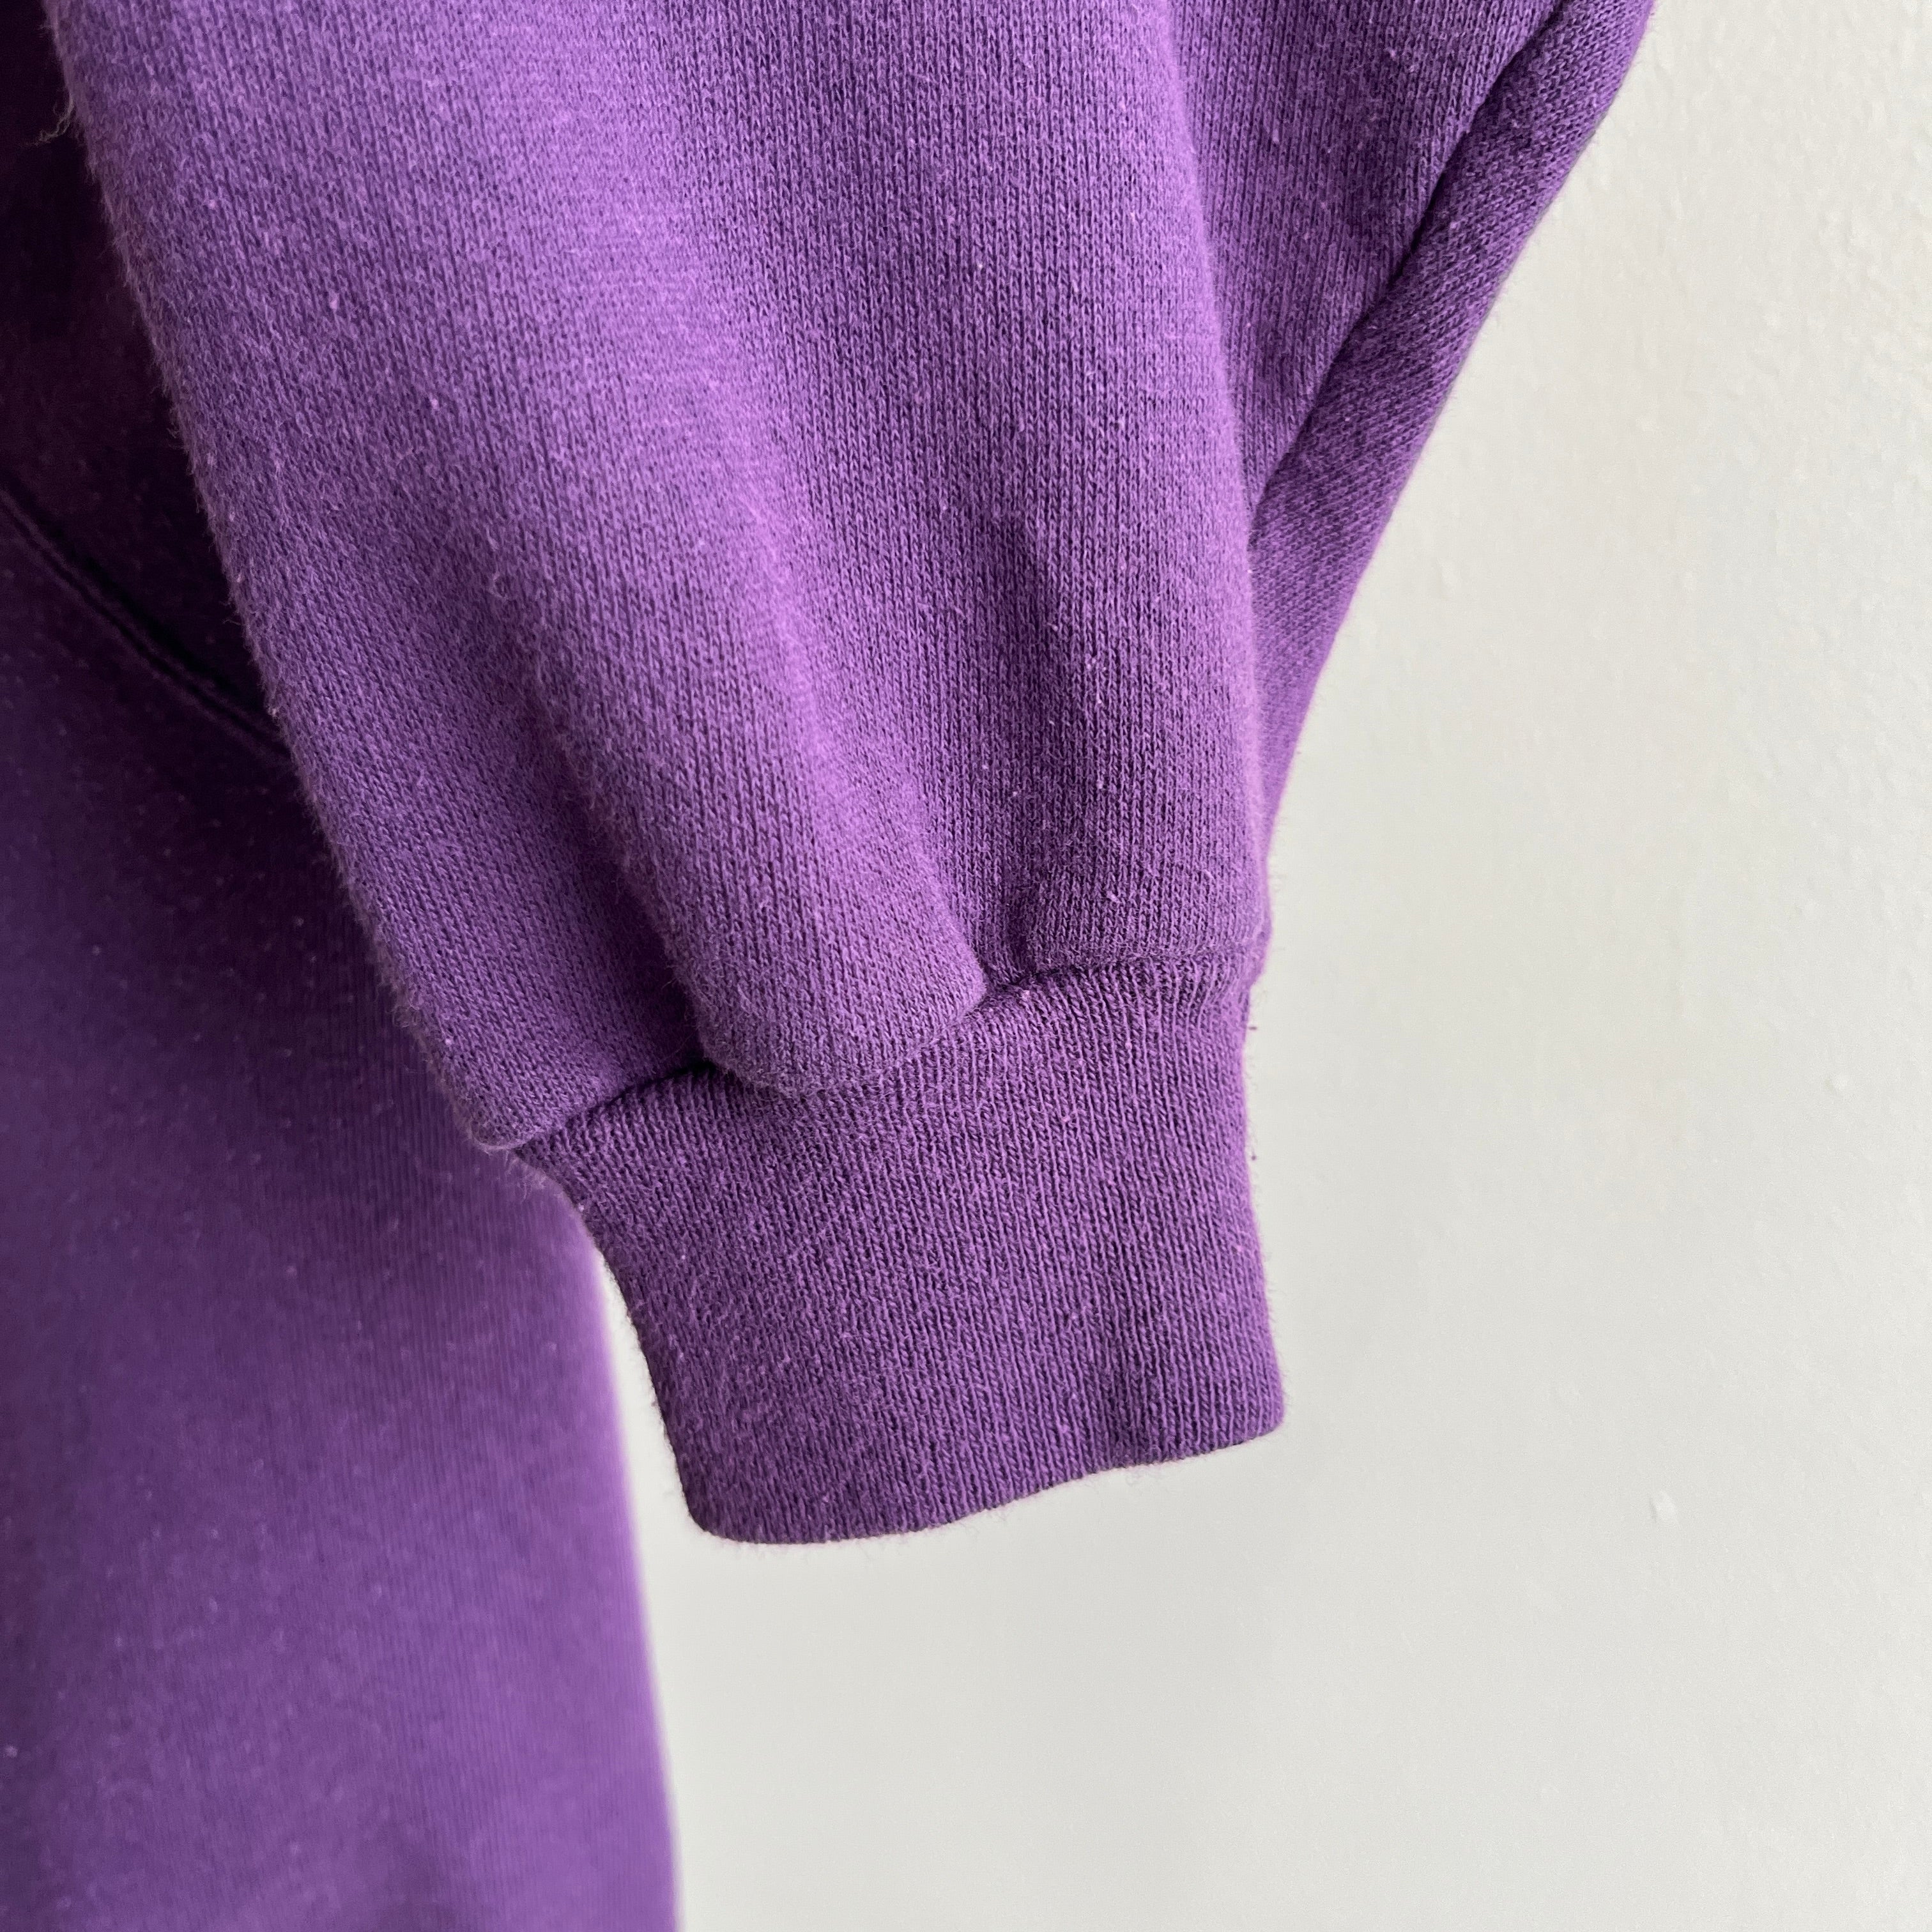 1980s Purple Sweatshirt with a Lovely Drop Pit